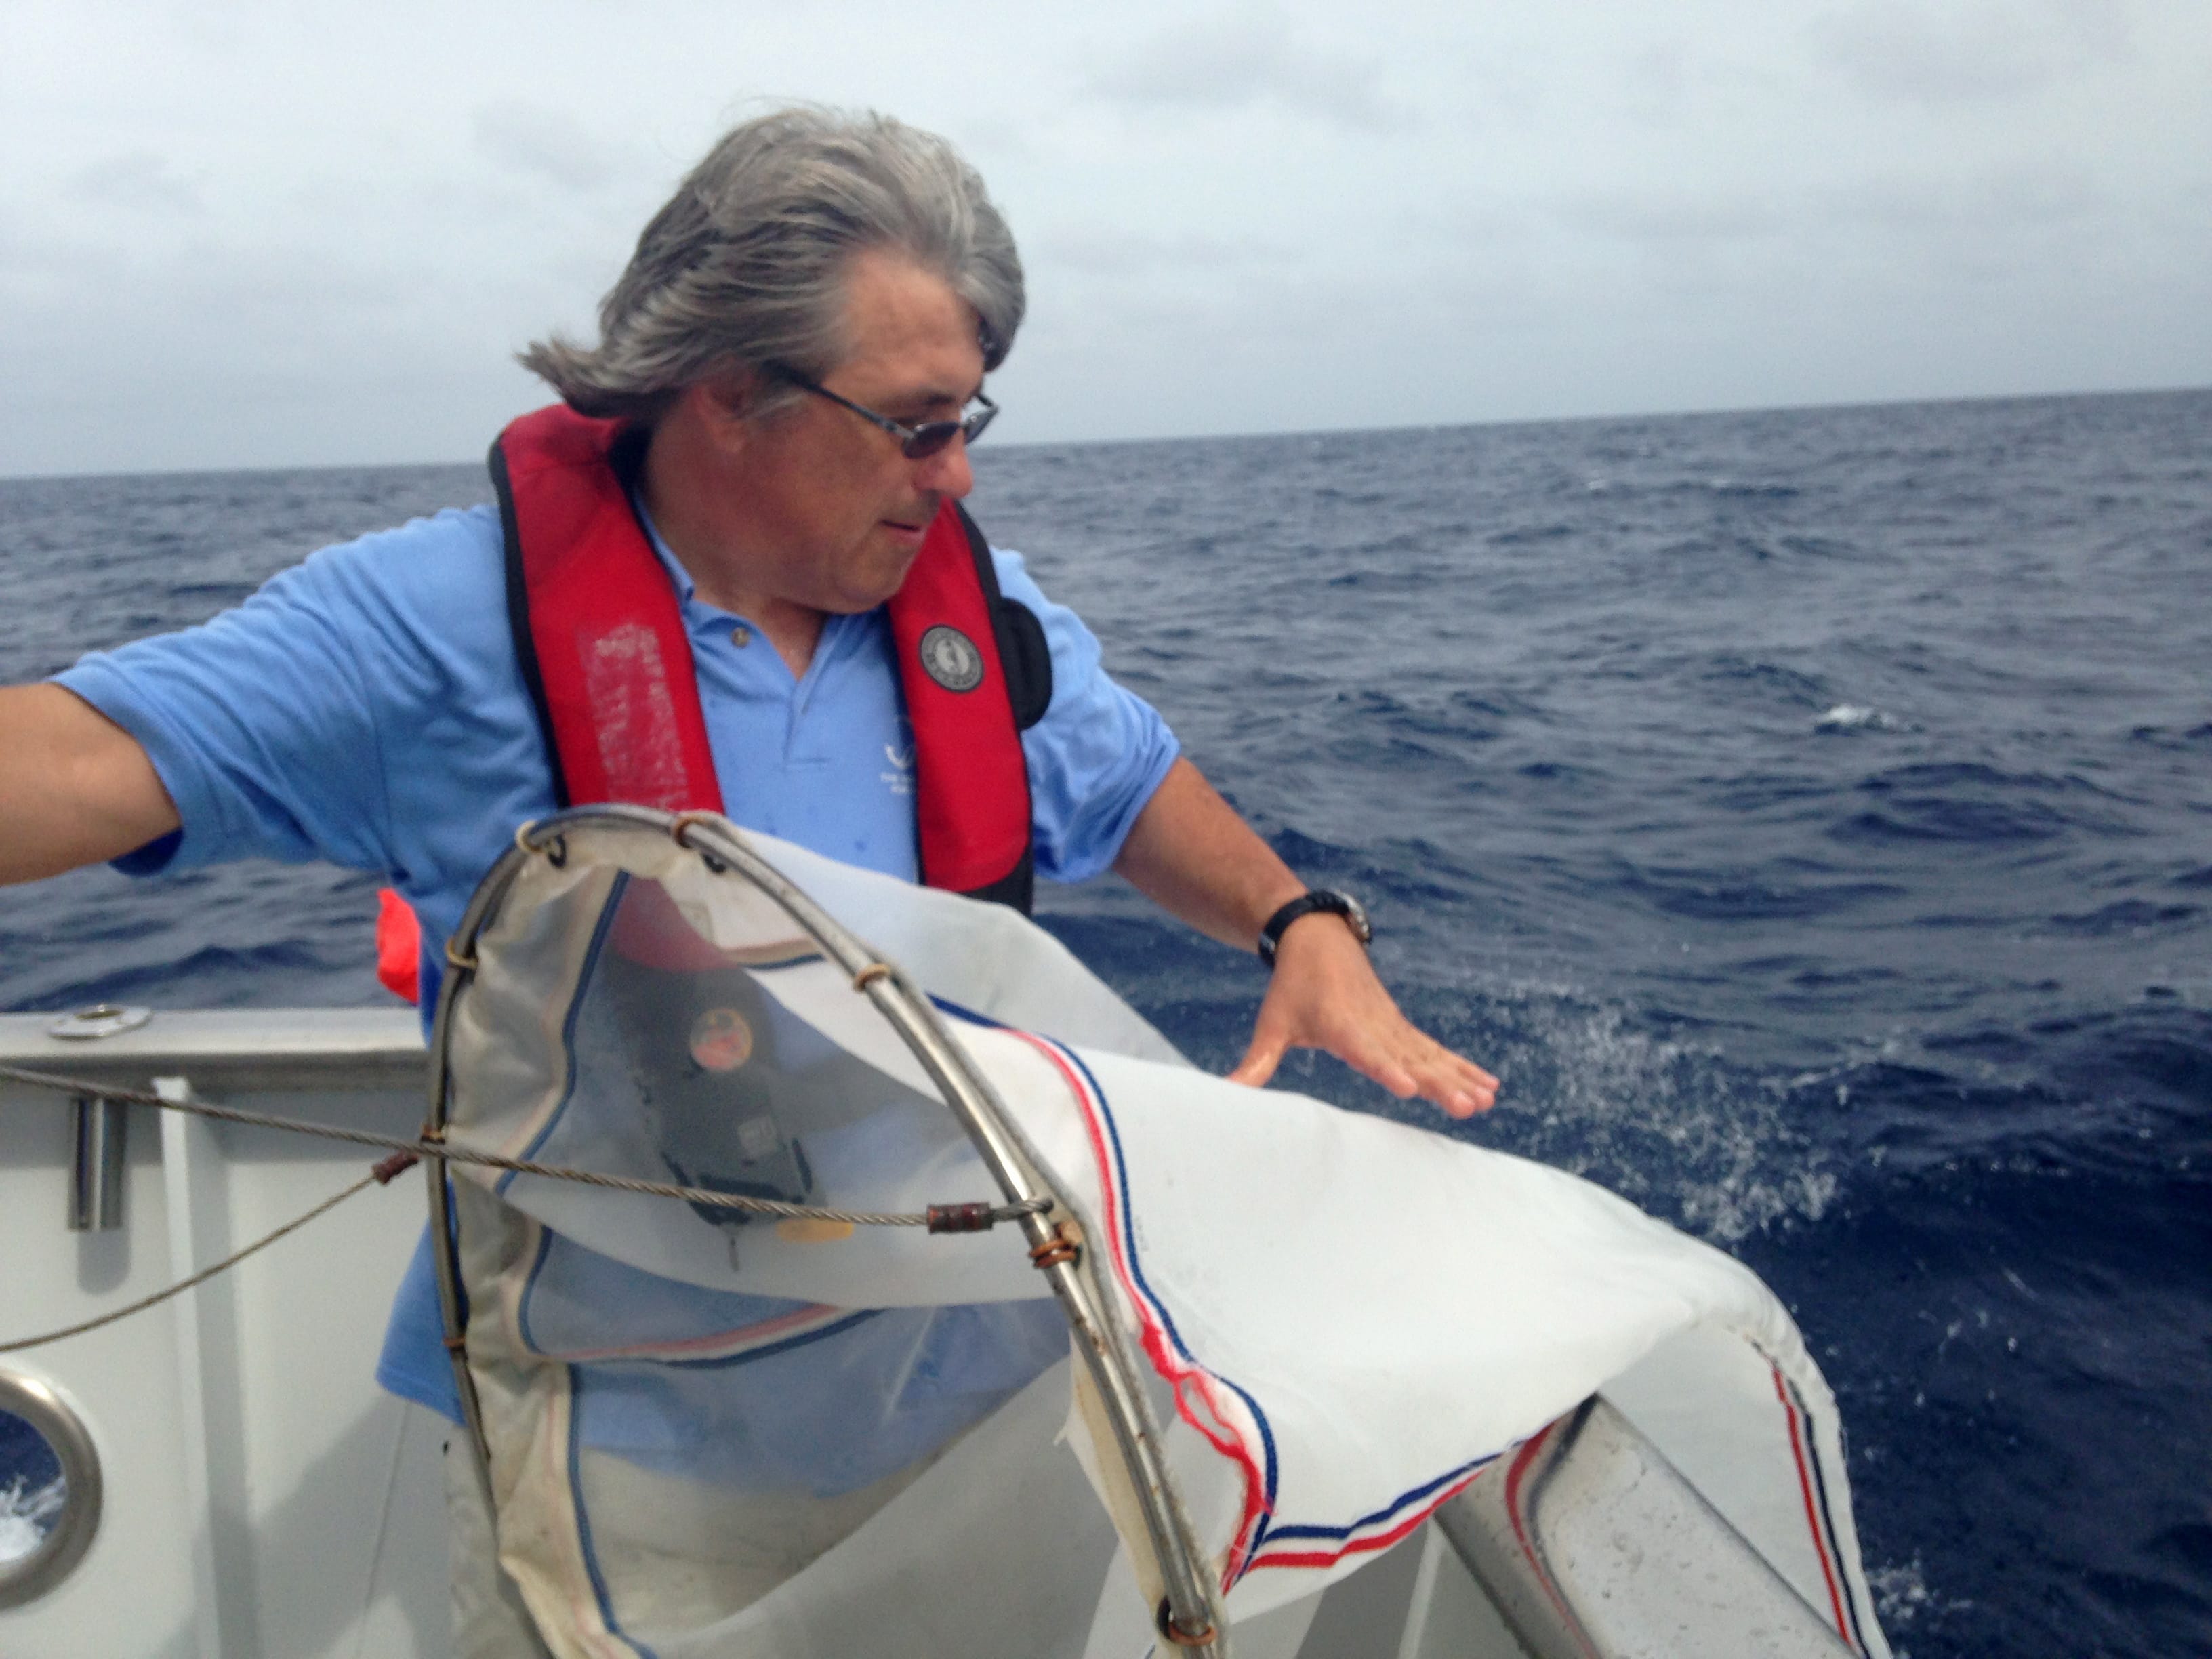 University of Florida neurobiologist Leonid Moroz pulls a net from the Gulf Stream off the coast of Florida, to examine invertebrate species.